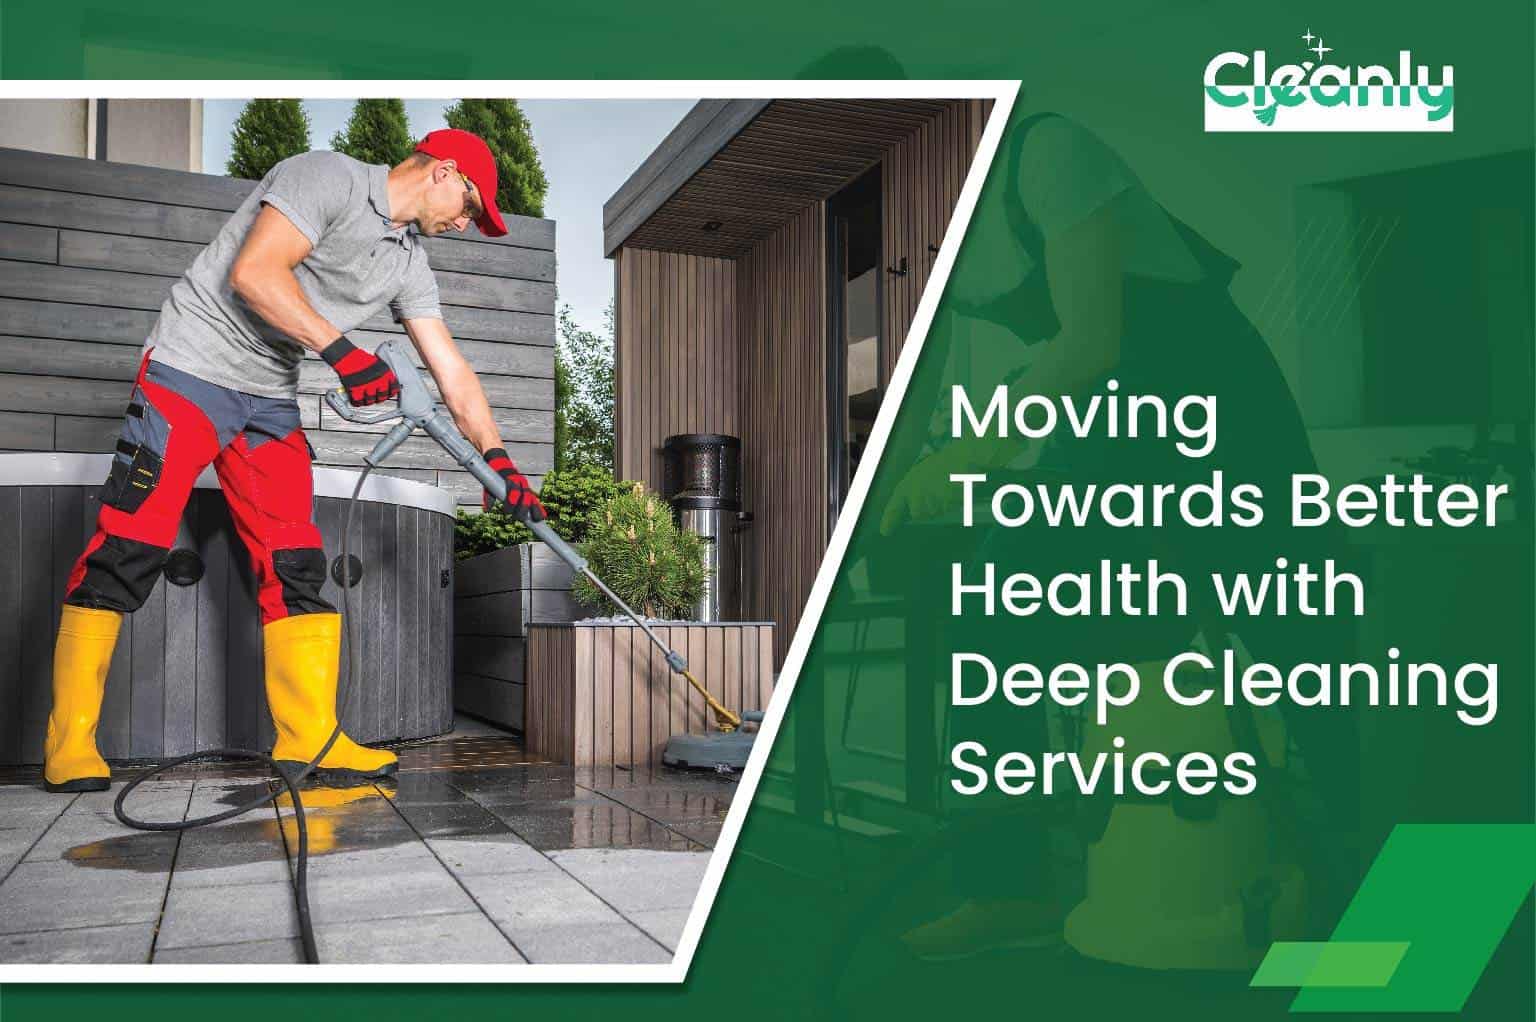 Moving Towards Better Health with Deep Cleaning Services